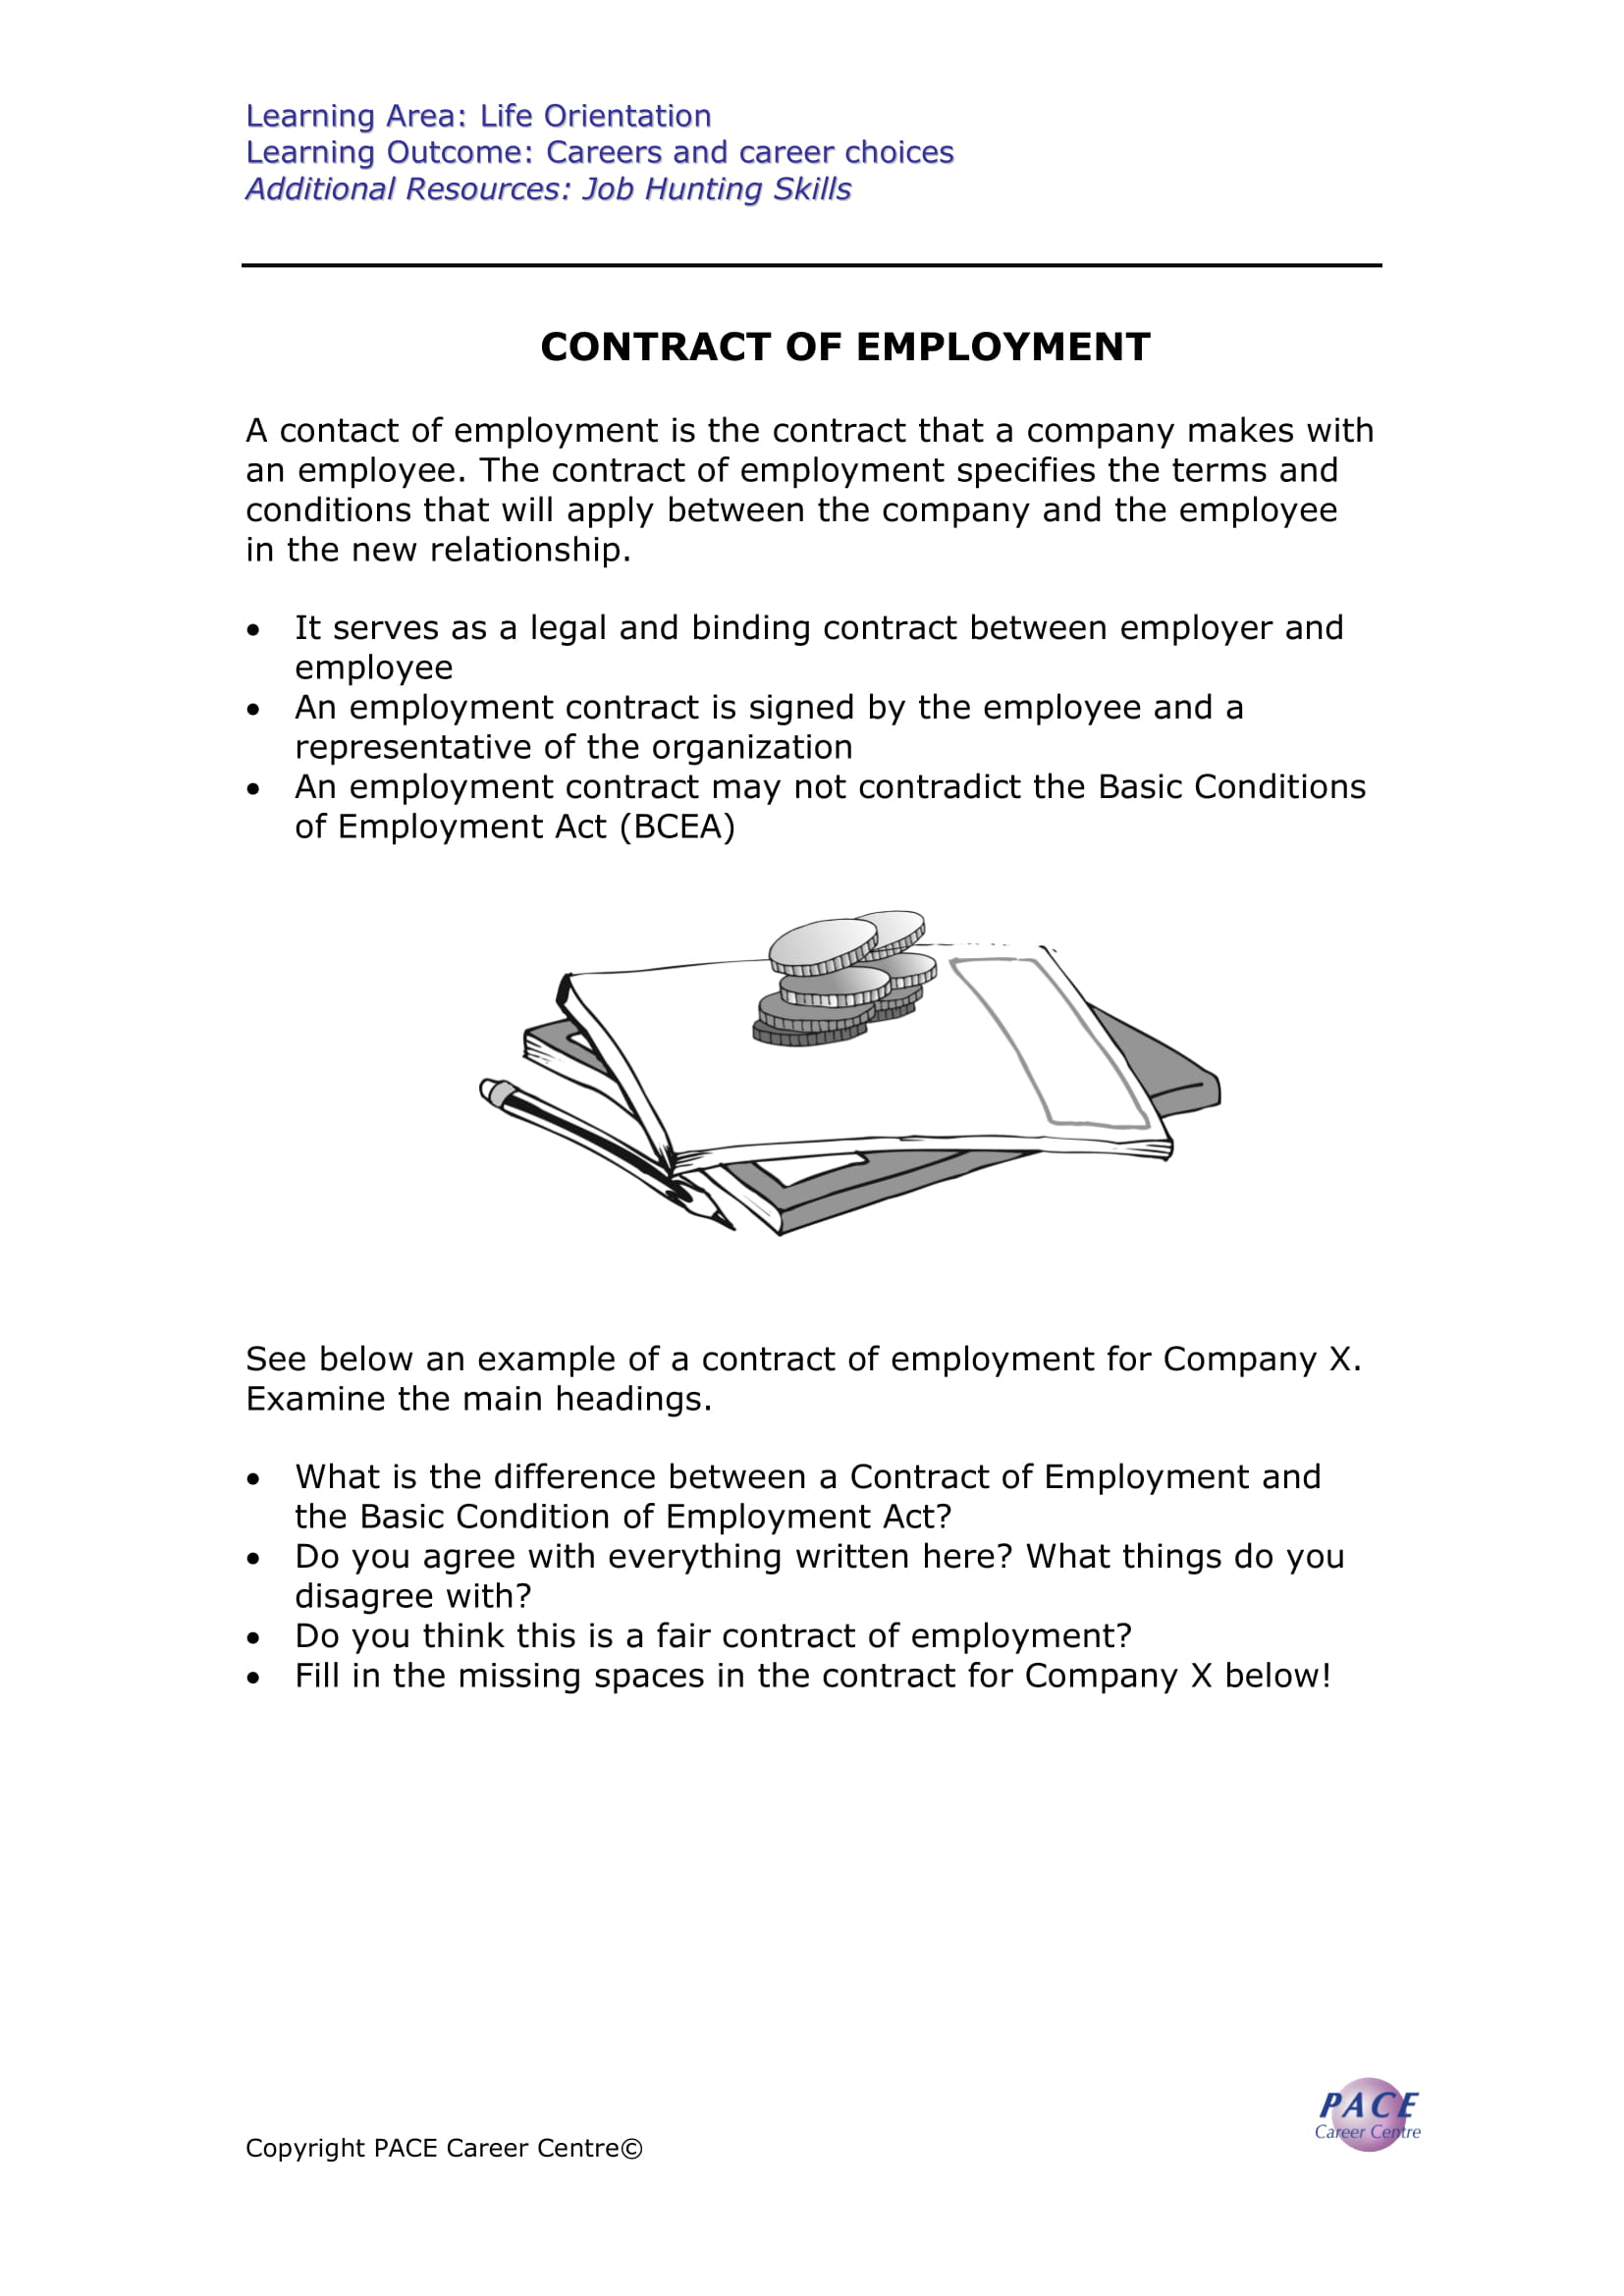 Contract of Employment Template and Guide